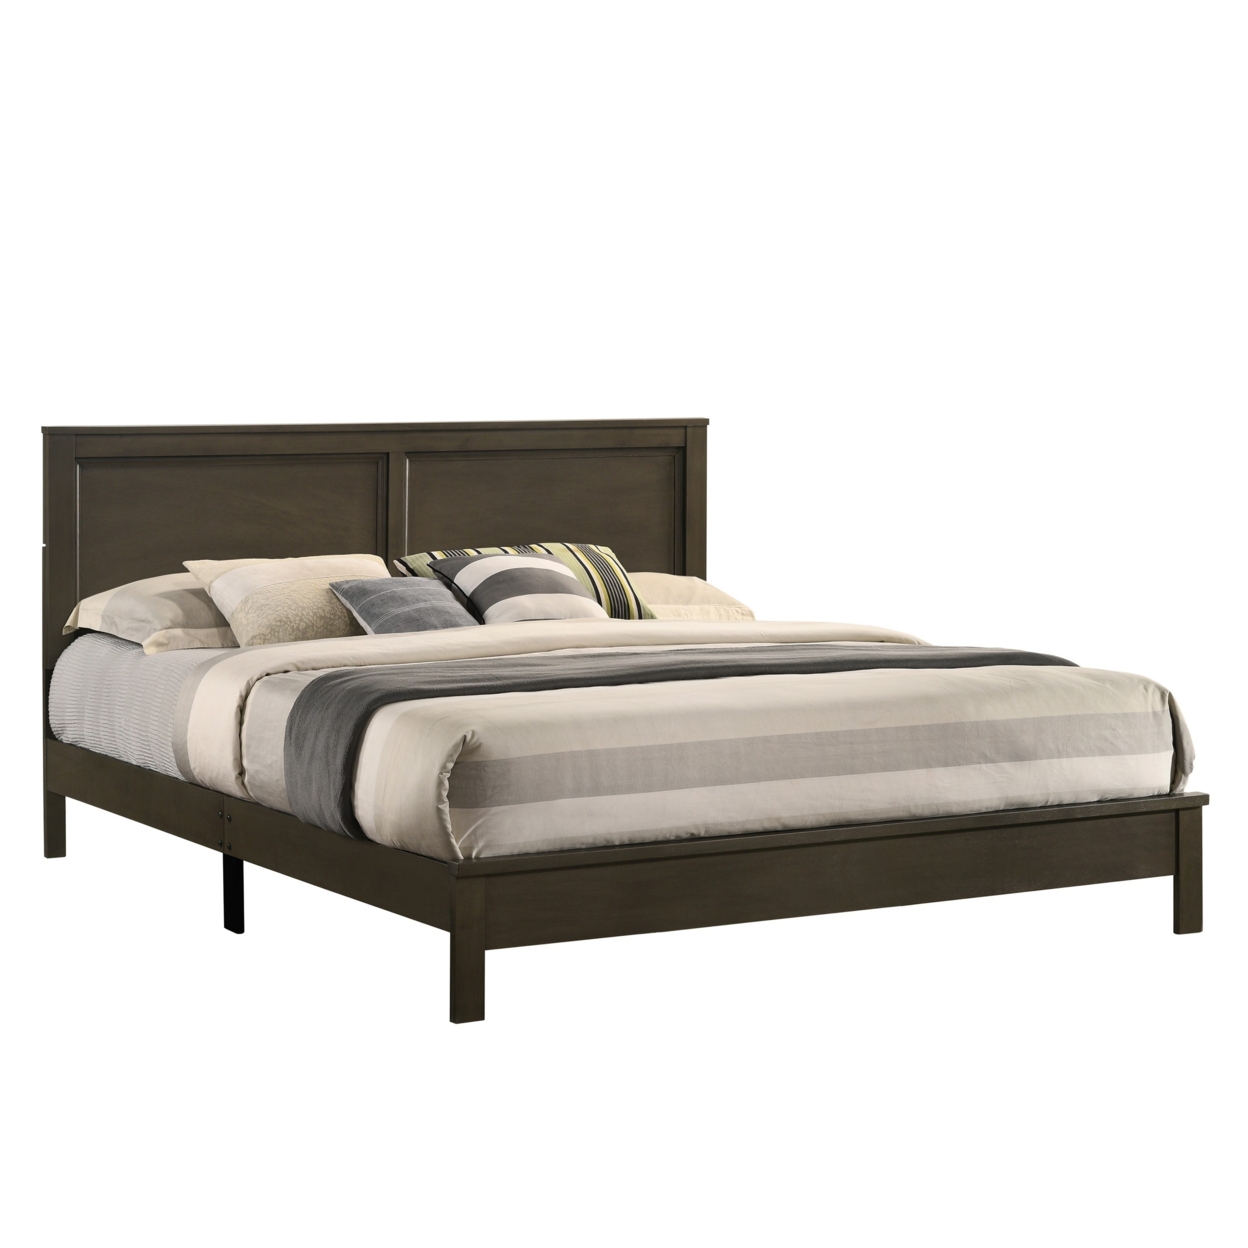 Isla King Size Panel Bed With Low Profile Rubberwood Frame, Taupe Brown- Saltoro Sherpi